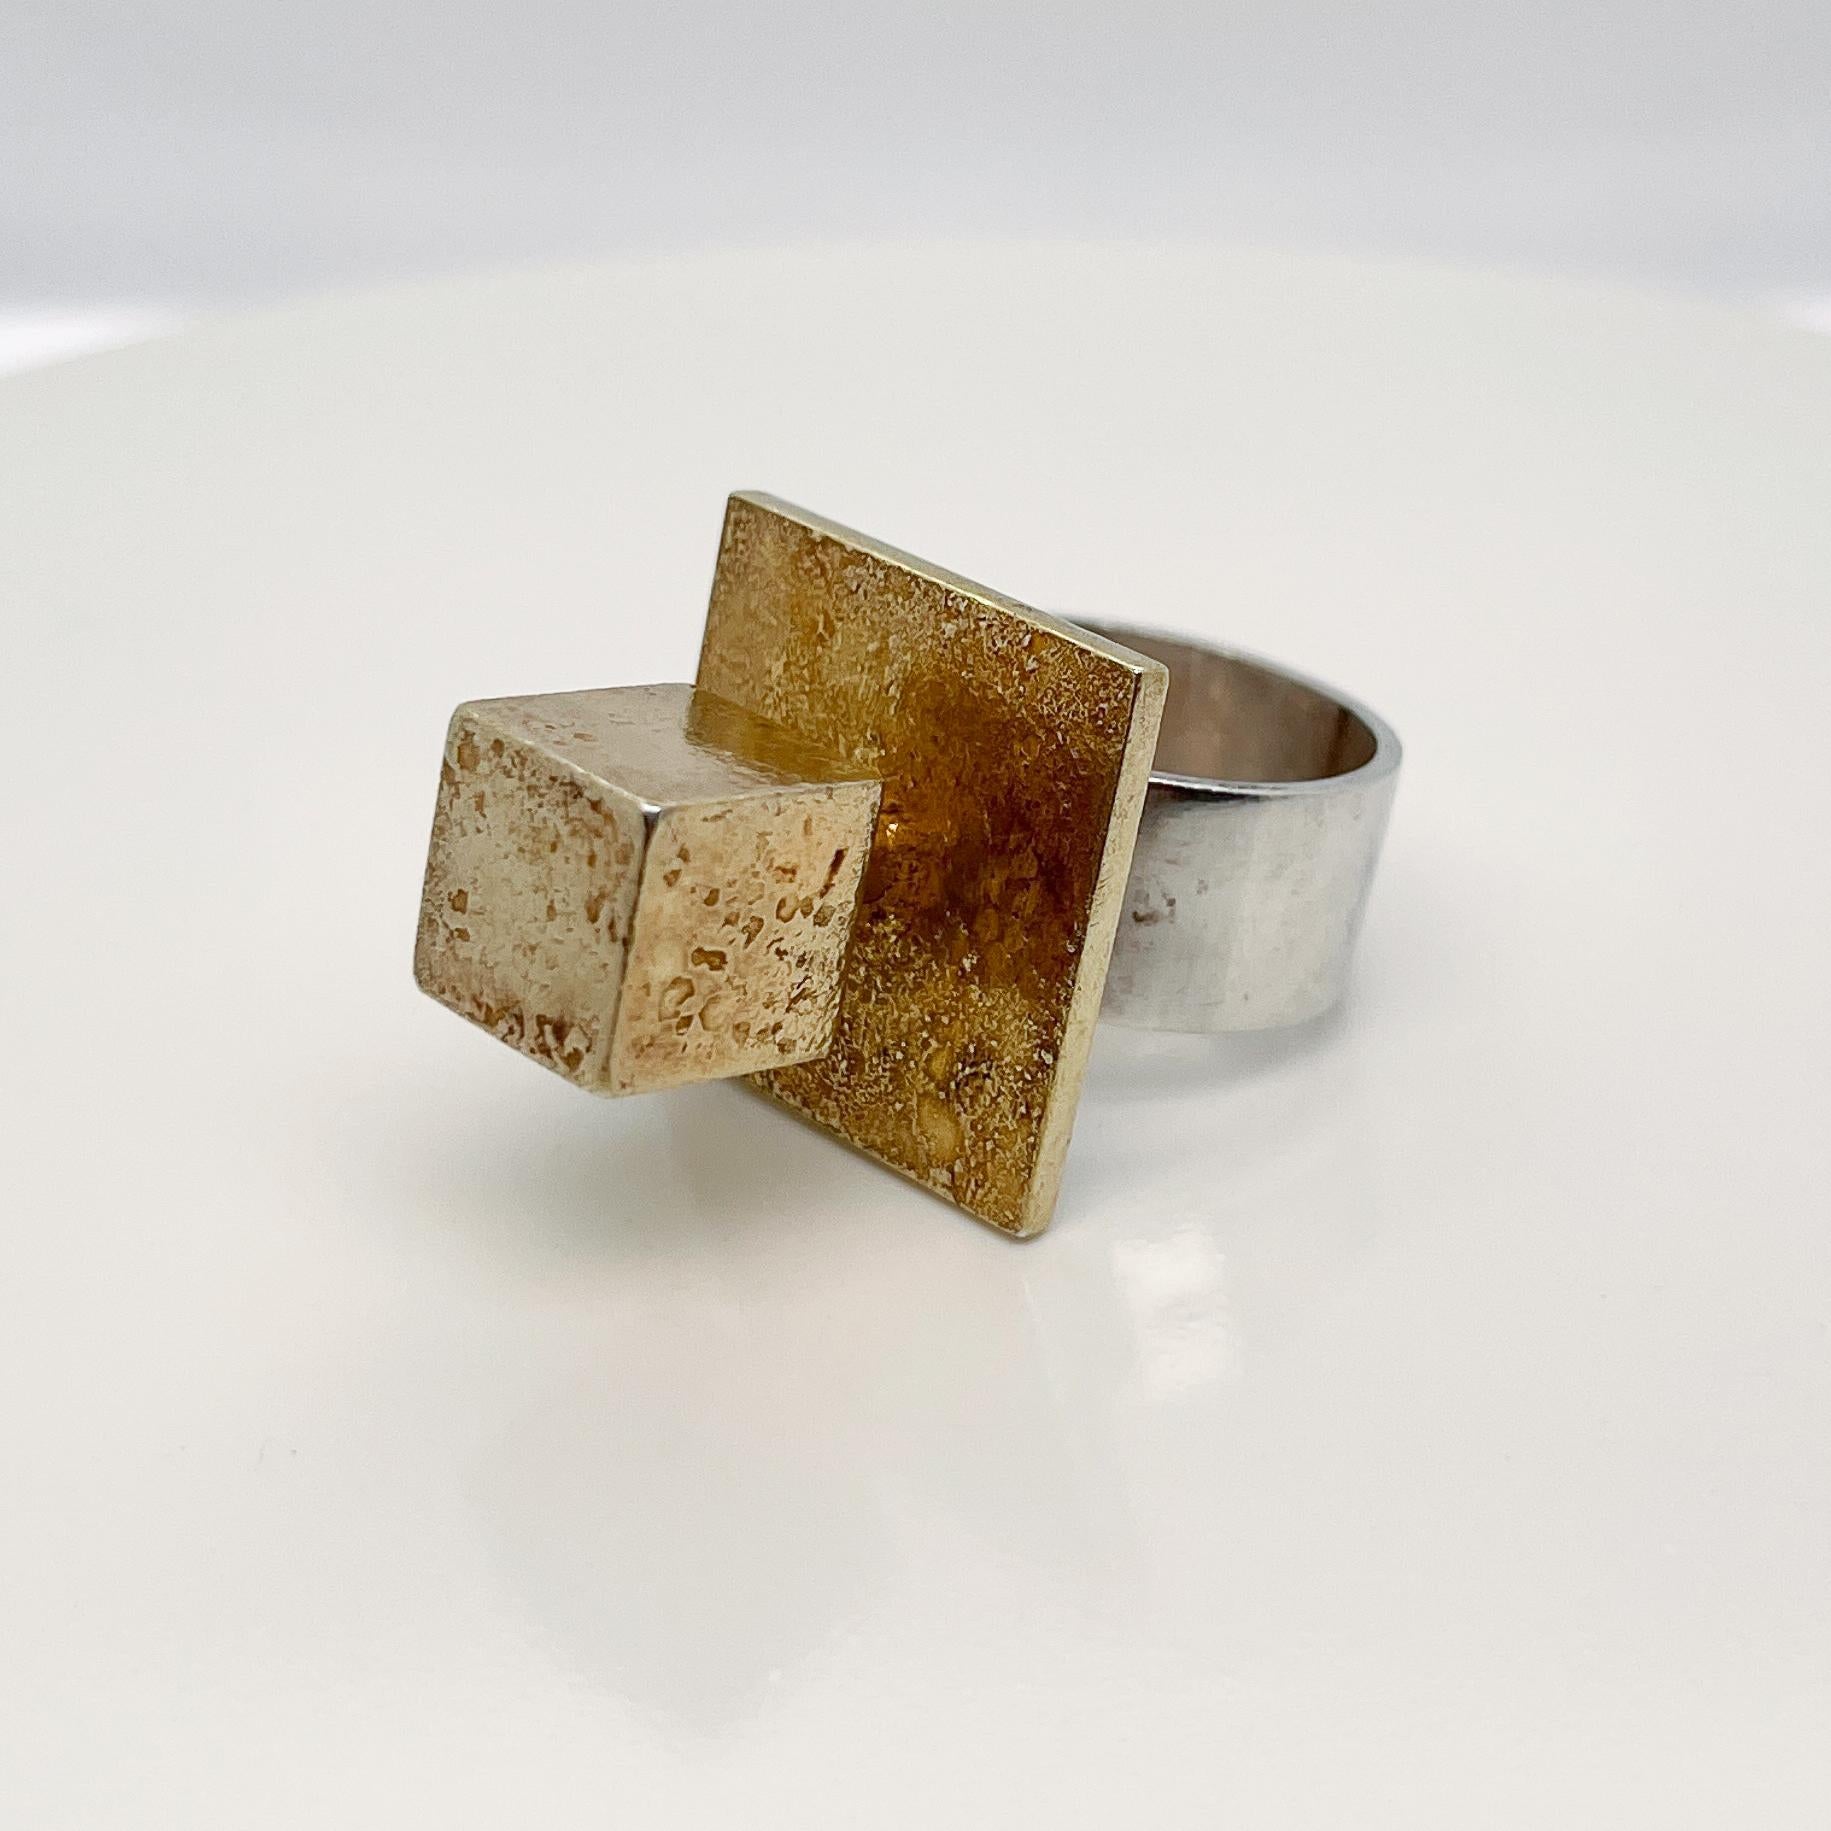 A very fine Bent Exner Danish modernist cocktail ring. 

The top with a fire-gilded cube set on a platform and supported by a thick sterling silver band.

Simply eye-catching design from an amazing jewelry maker!

Date:
20th Century

Overall